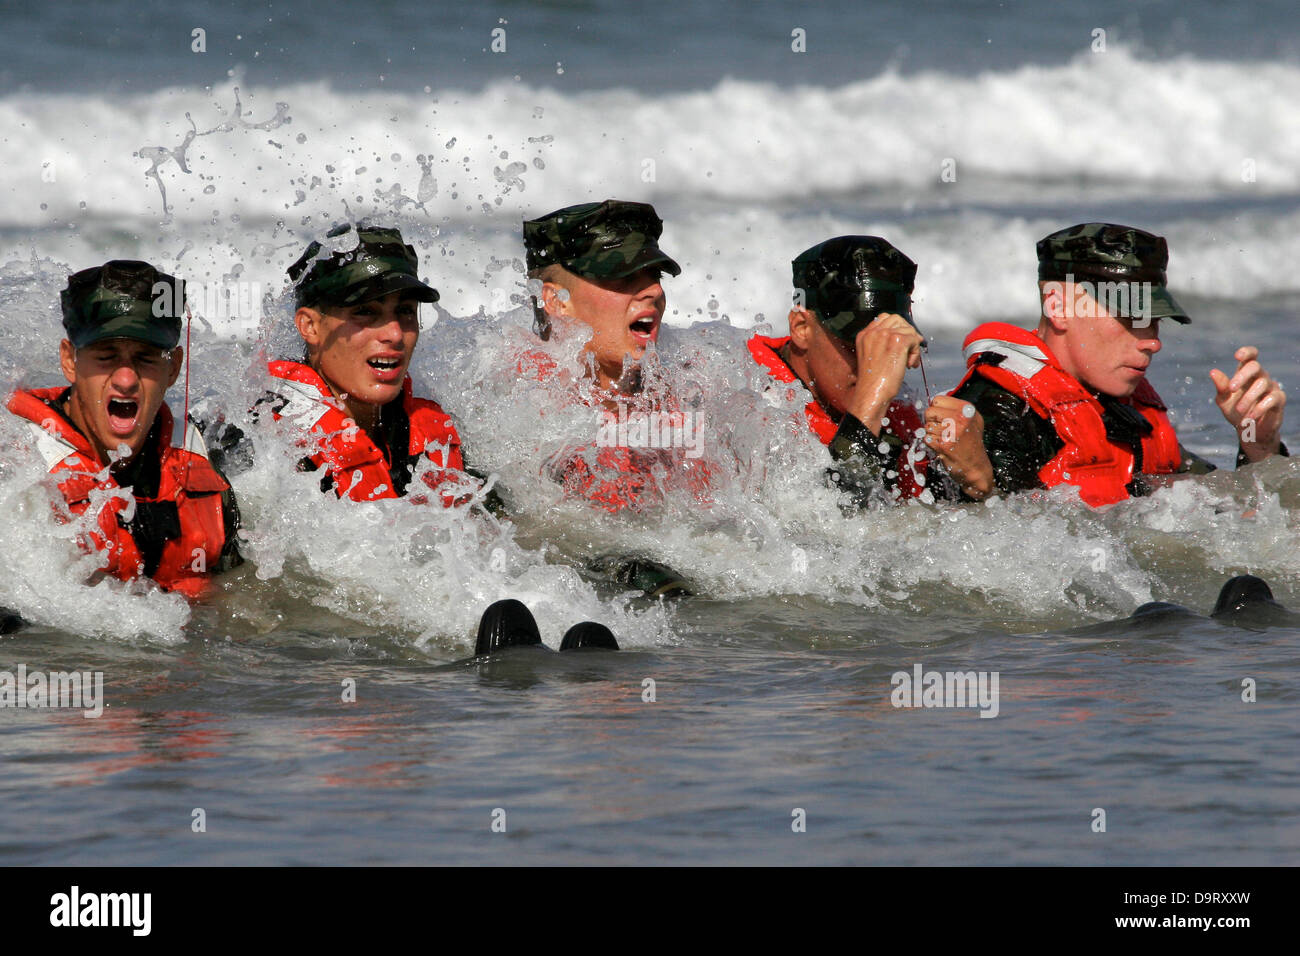 Navy SEAL candidates during surf passage exercises on the first phase of training at Naval Amphibious Base Coronado Sep. 10, 2009 in San Diego, CA. Stock Photo